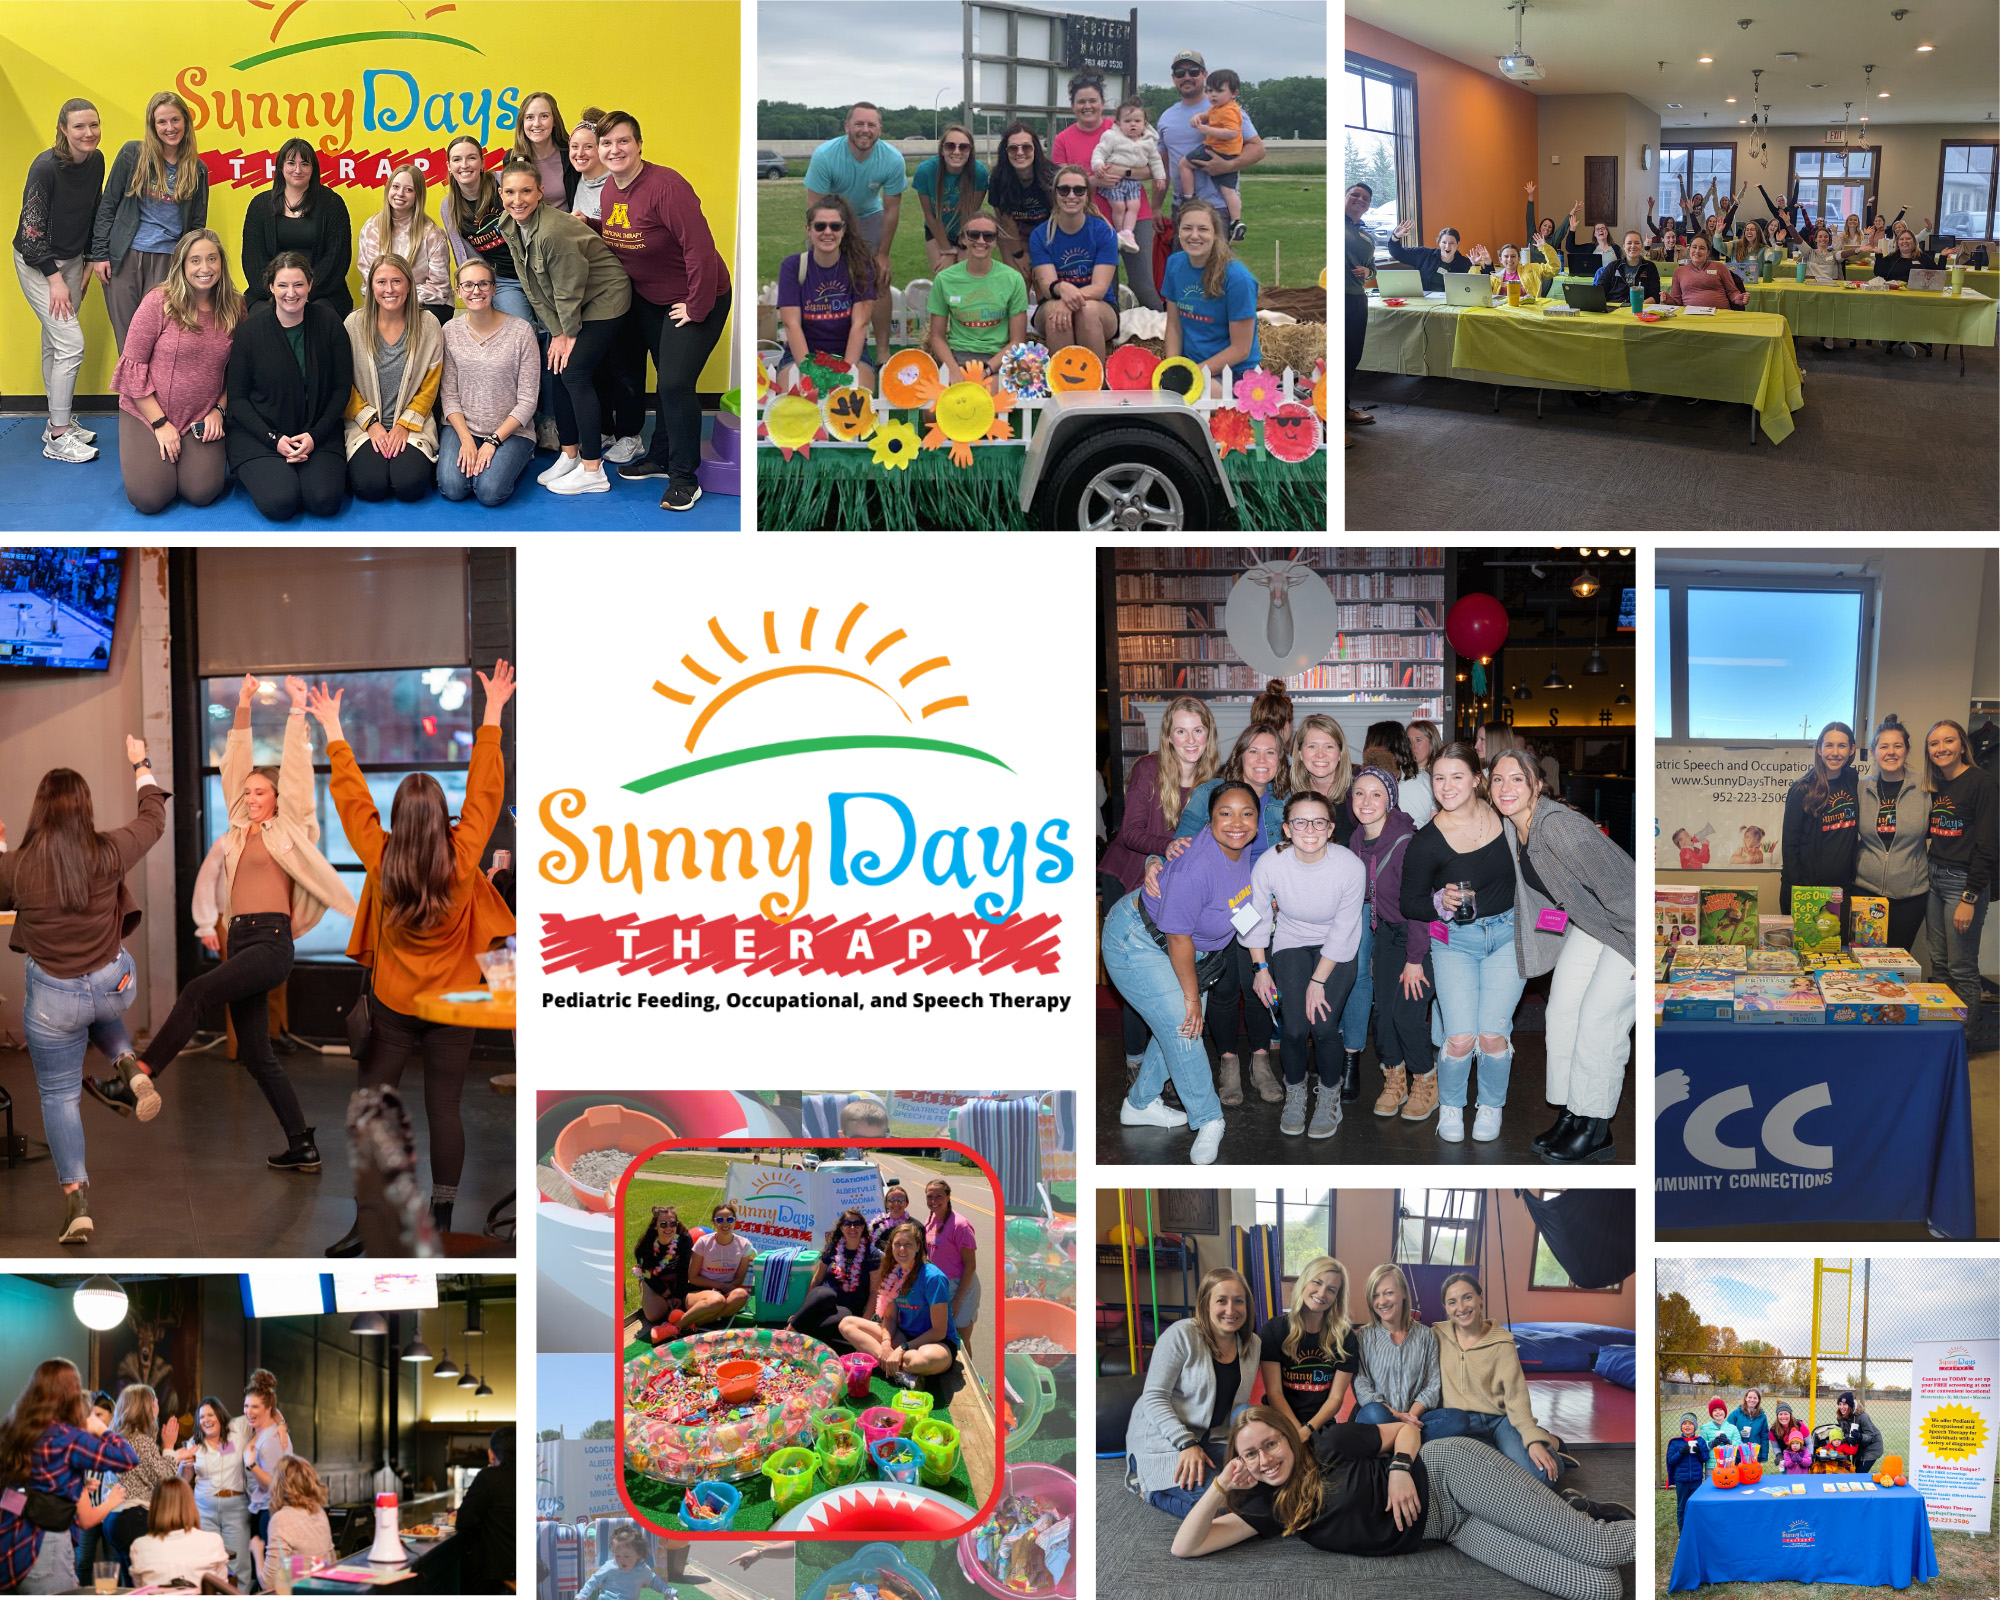 Join our outstanding team of OTs, PTs, and SLPs at SunnyDays Therapy!